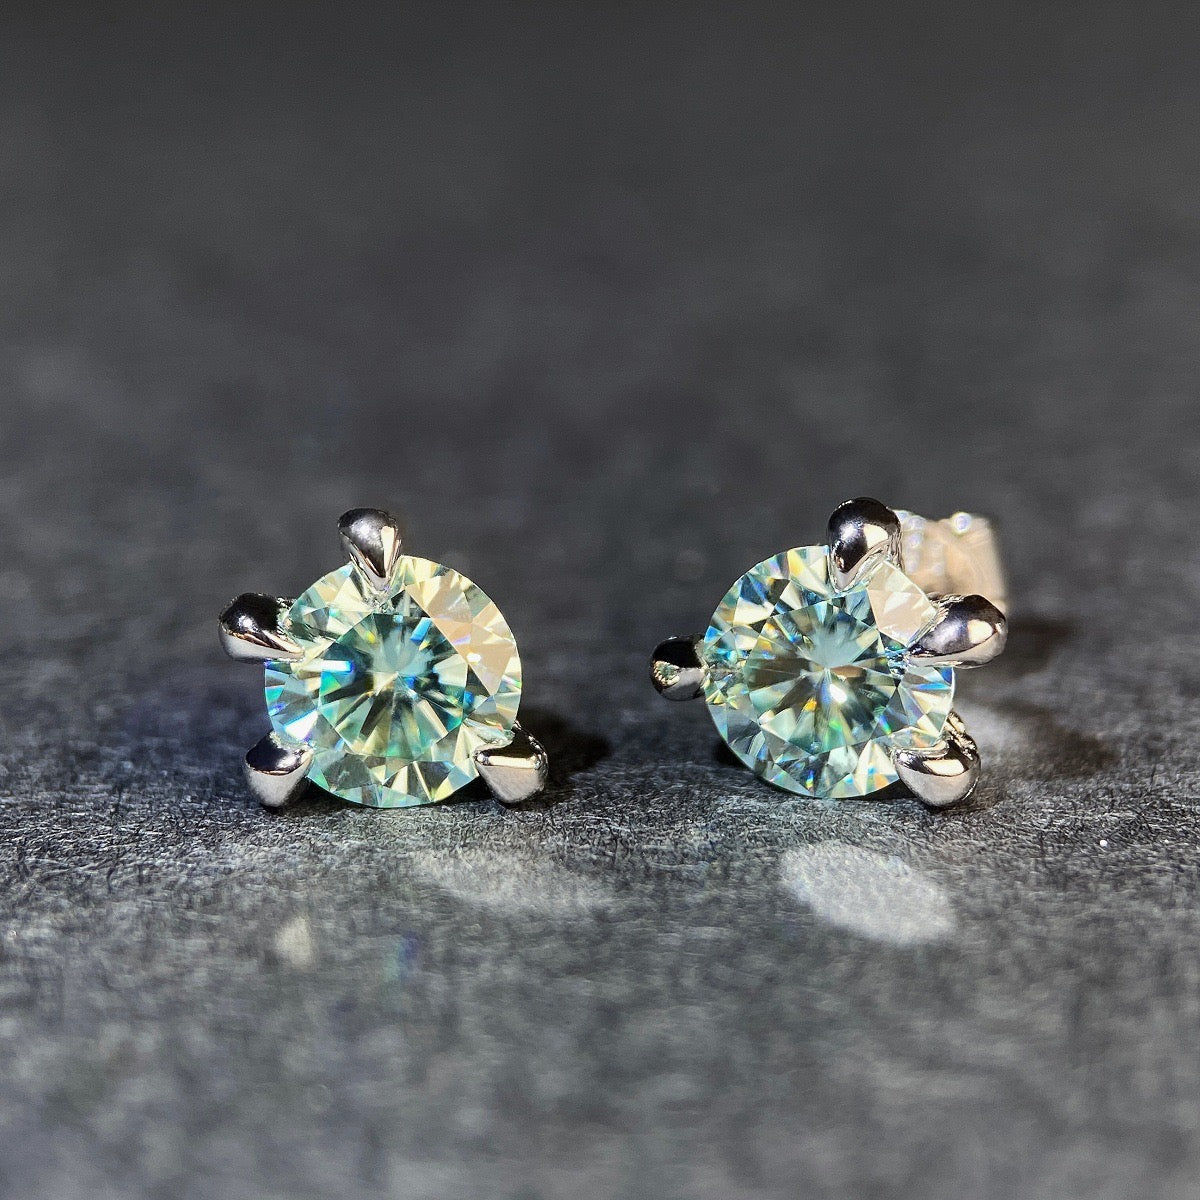 "Aegon" 0.5ct/1ct Dragon Claw Moissanite Earring Studs